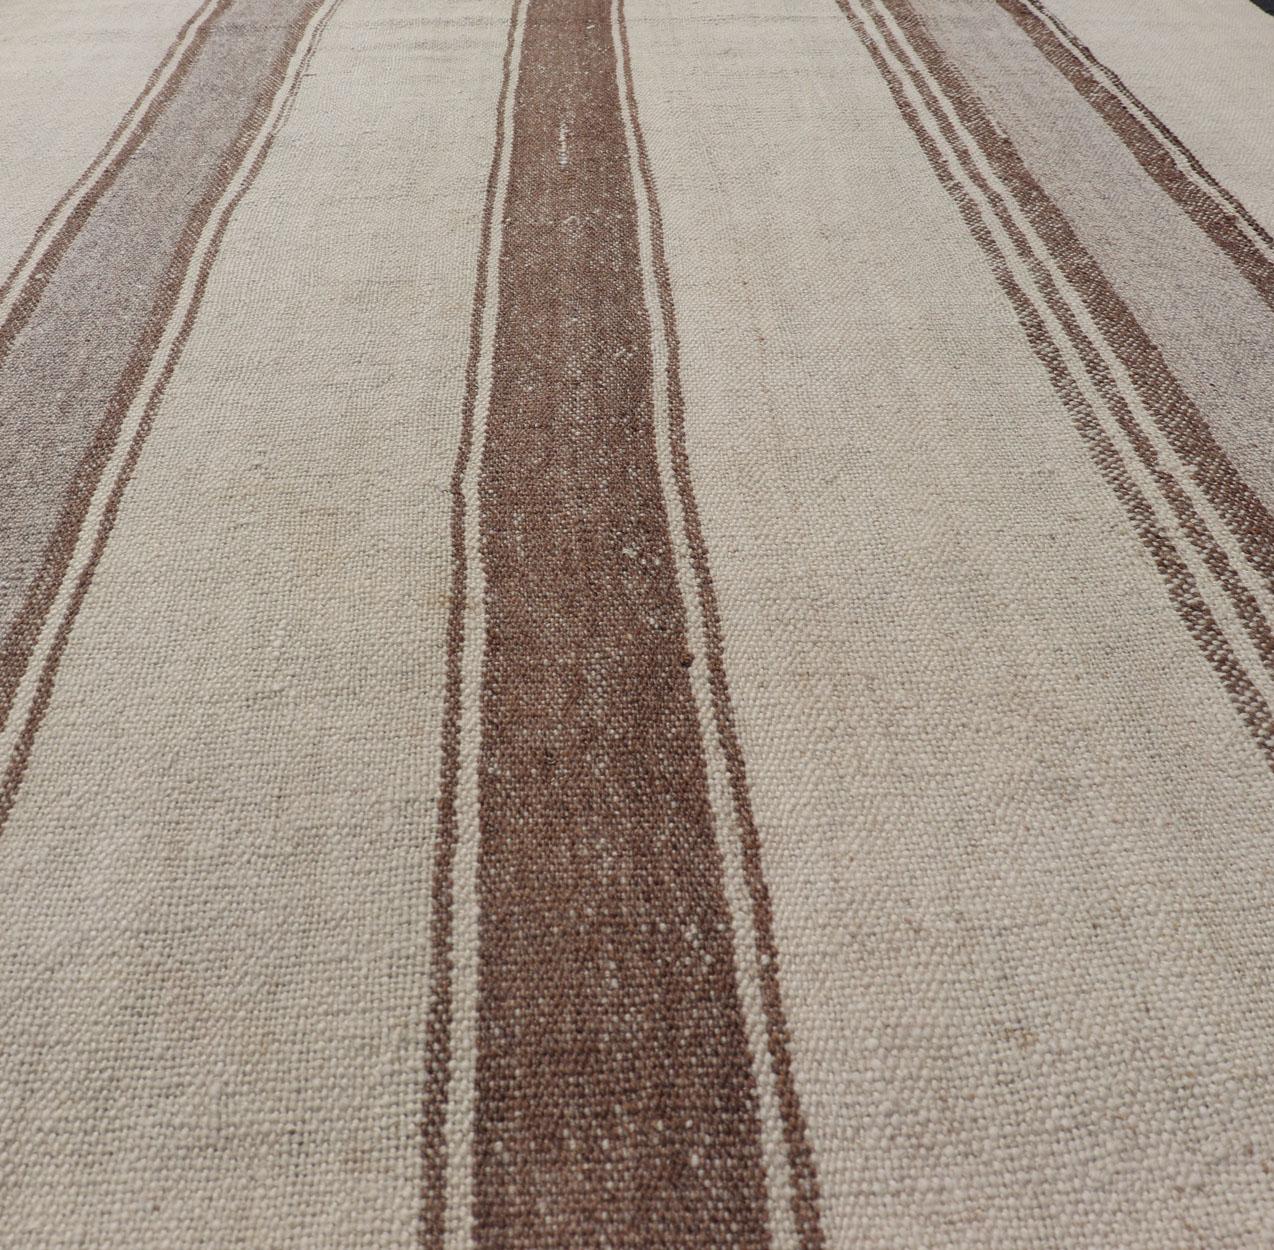 Wool Vintage Turkish Kilim with Stripes in Tan, Gray, Taupe, Cream & Brown For Sale